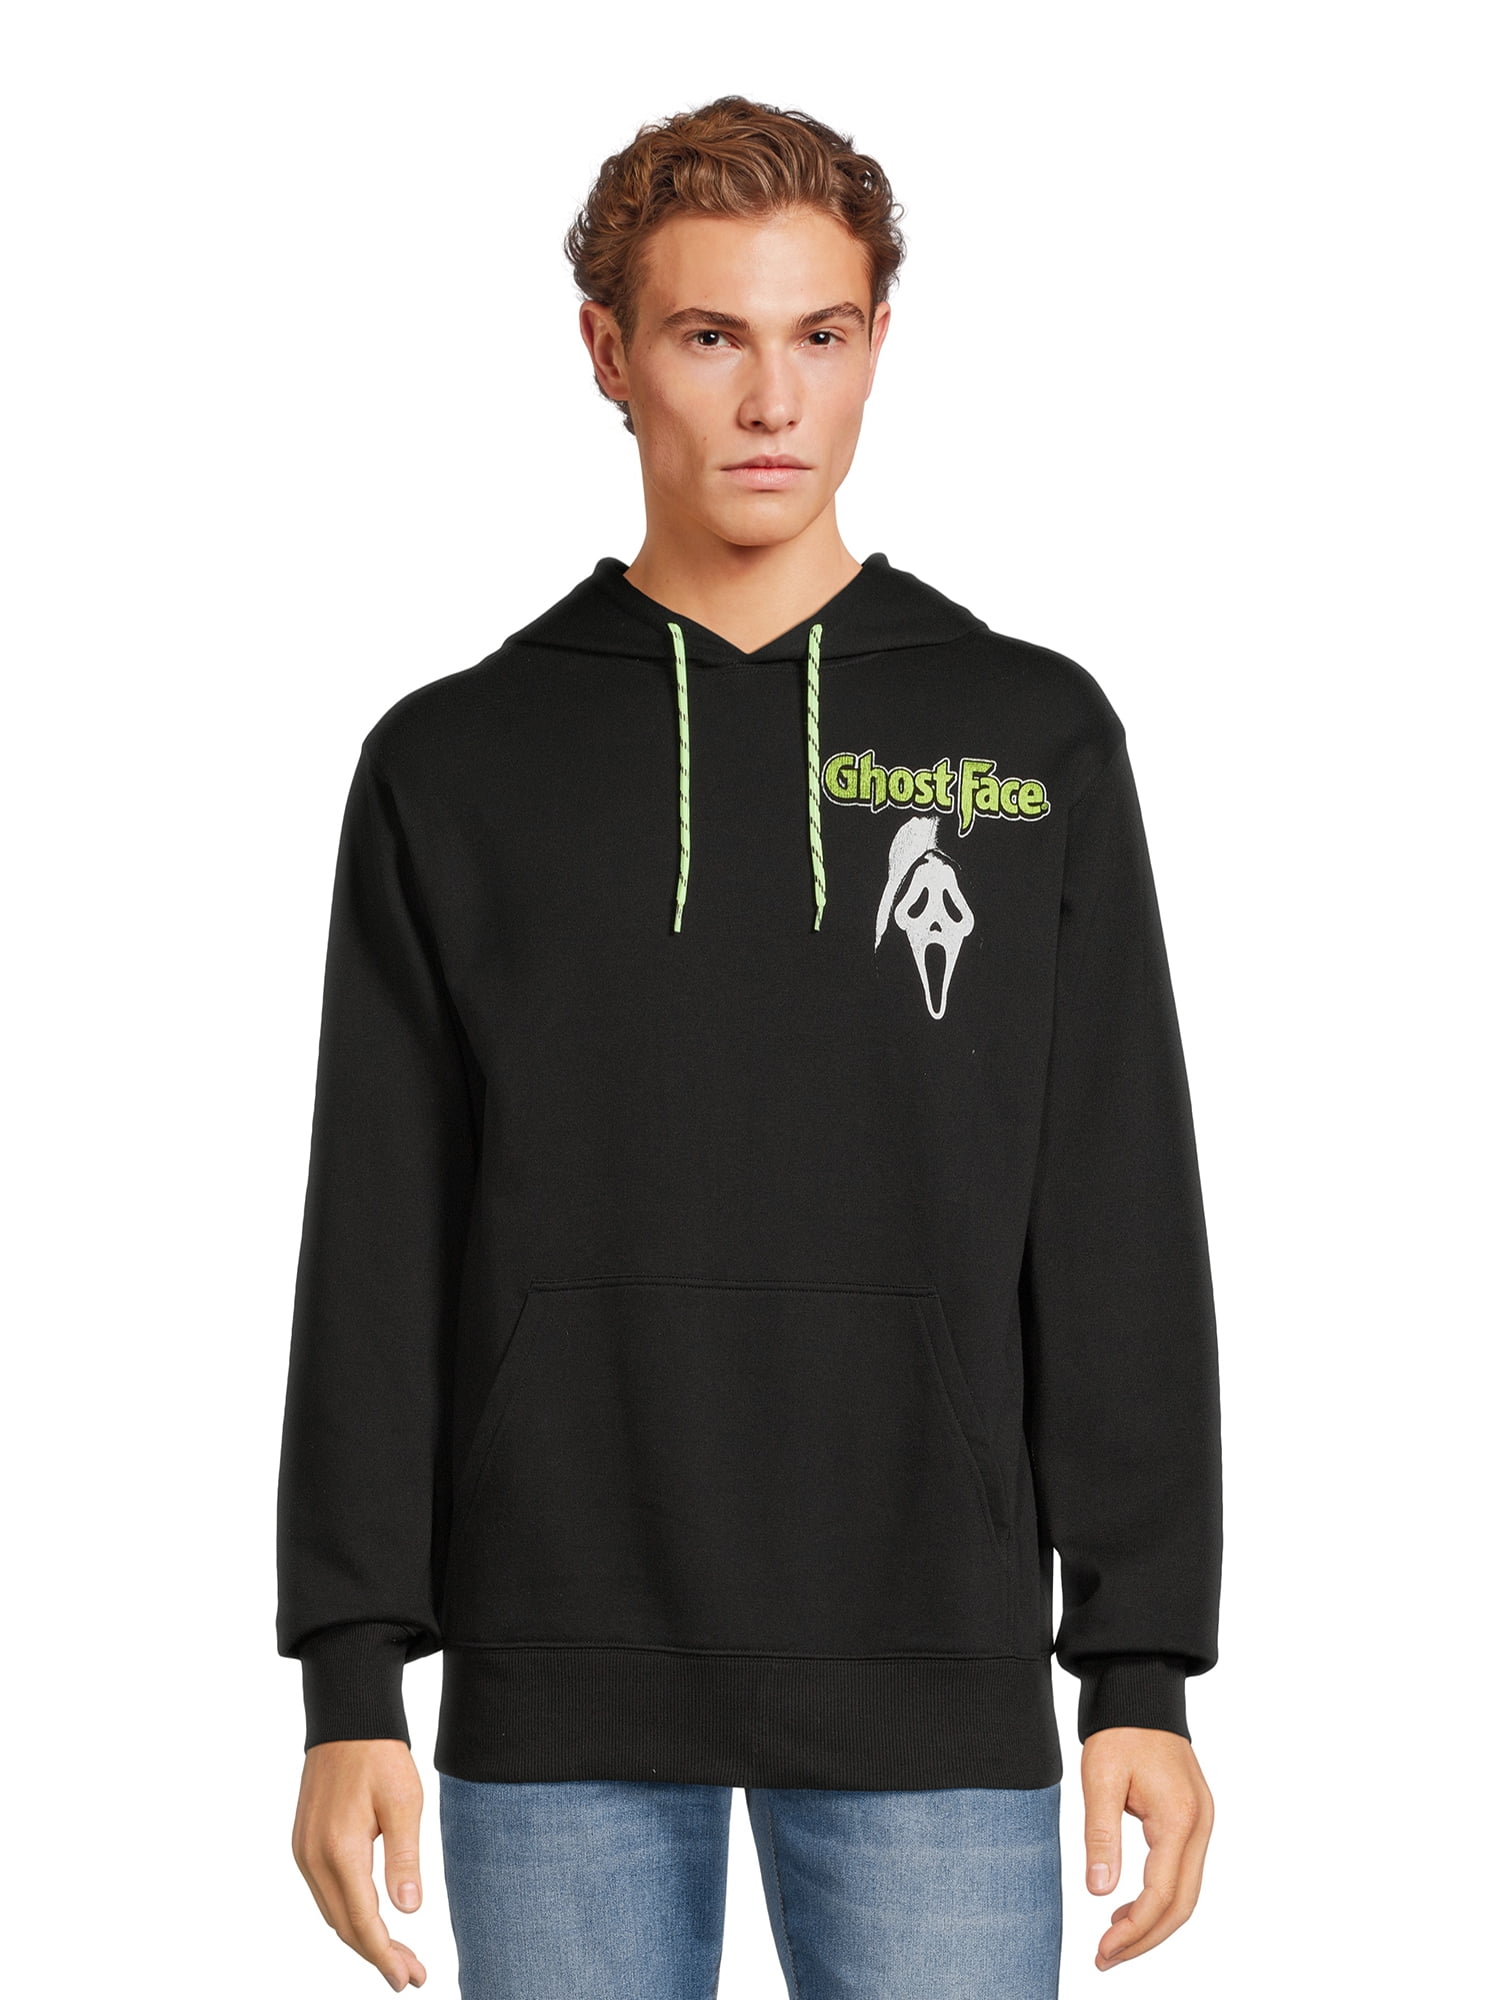 Ghost Face Men's & Big Men's Hoodie with Long Sleeves, Sizes XS-3XL